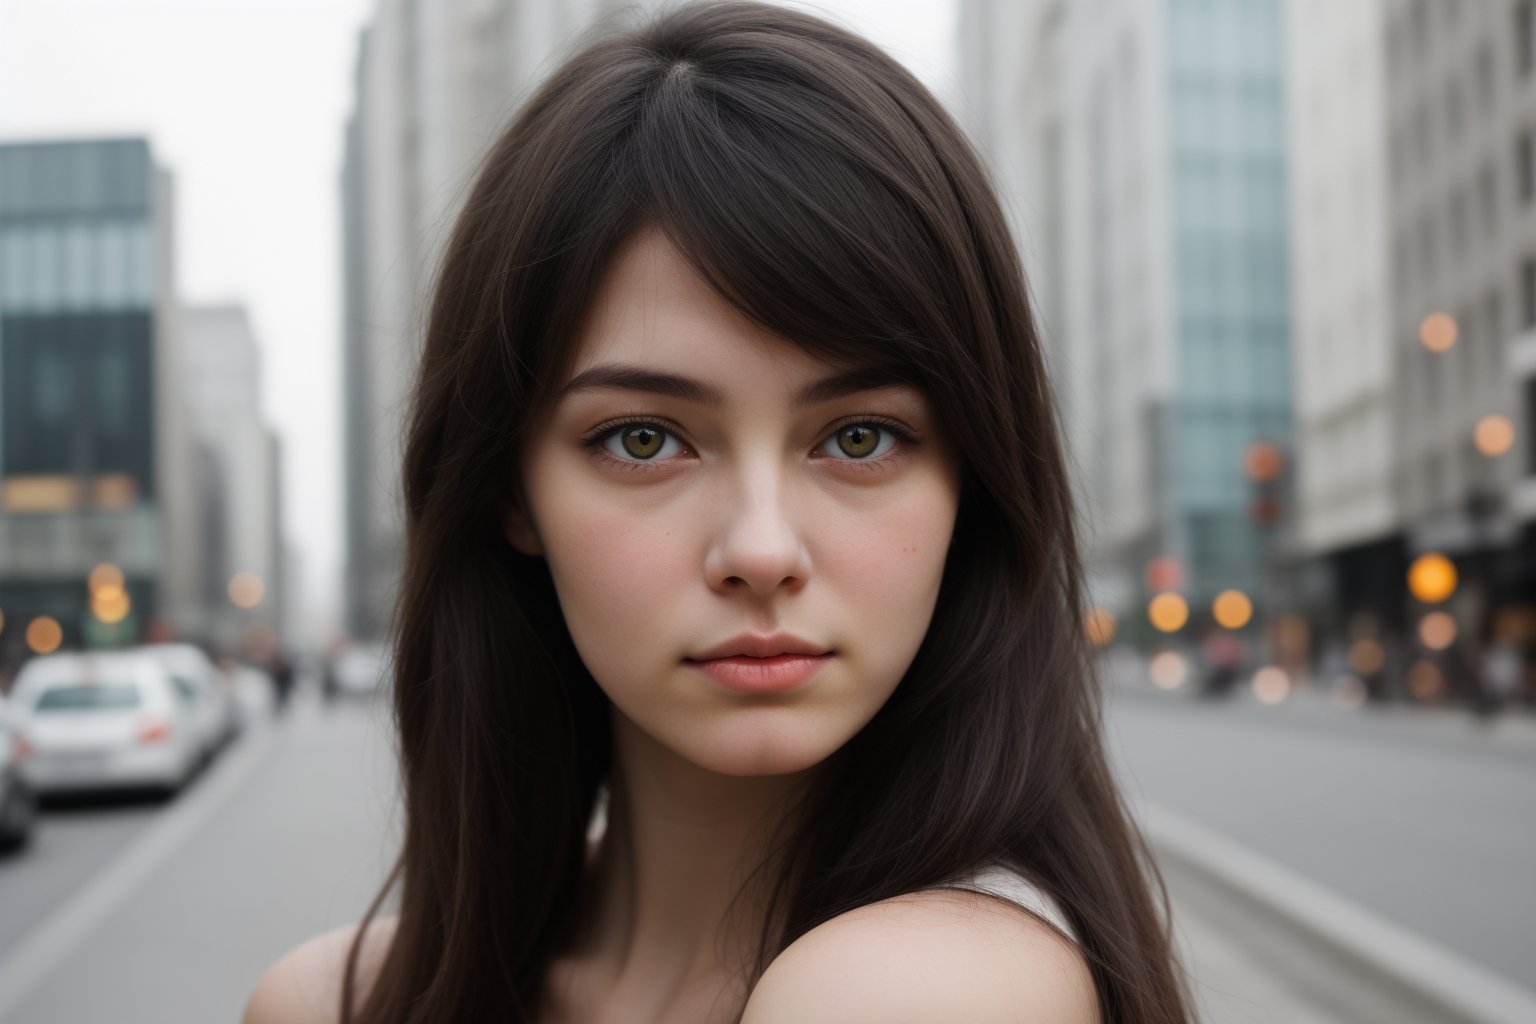 woman, yellow eyes, black long hair, pale skin, city, small nose, soft face